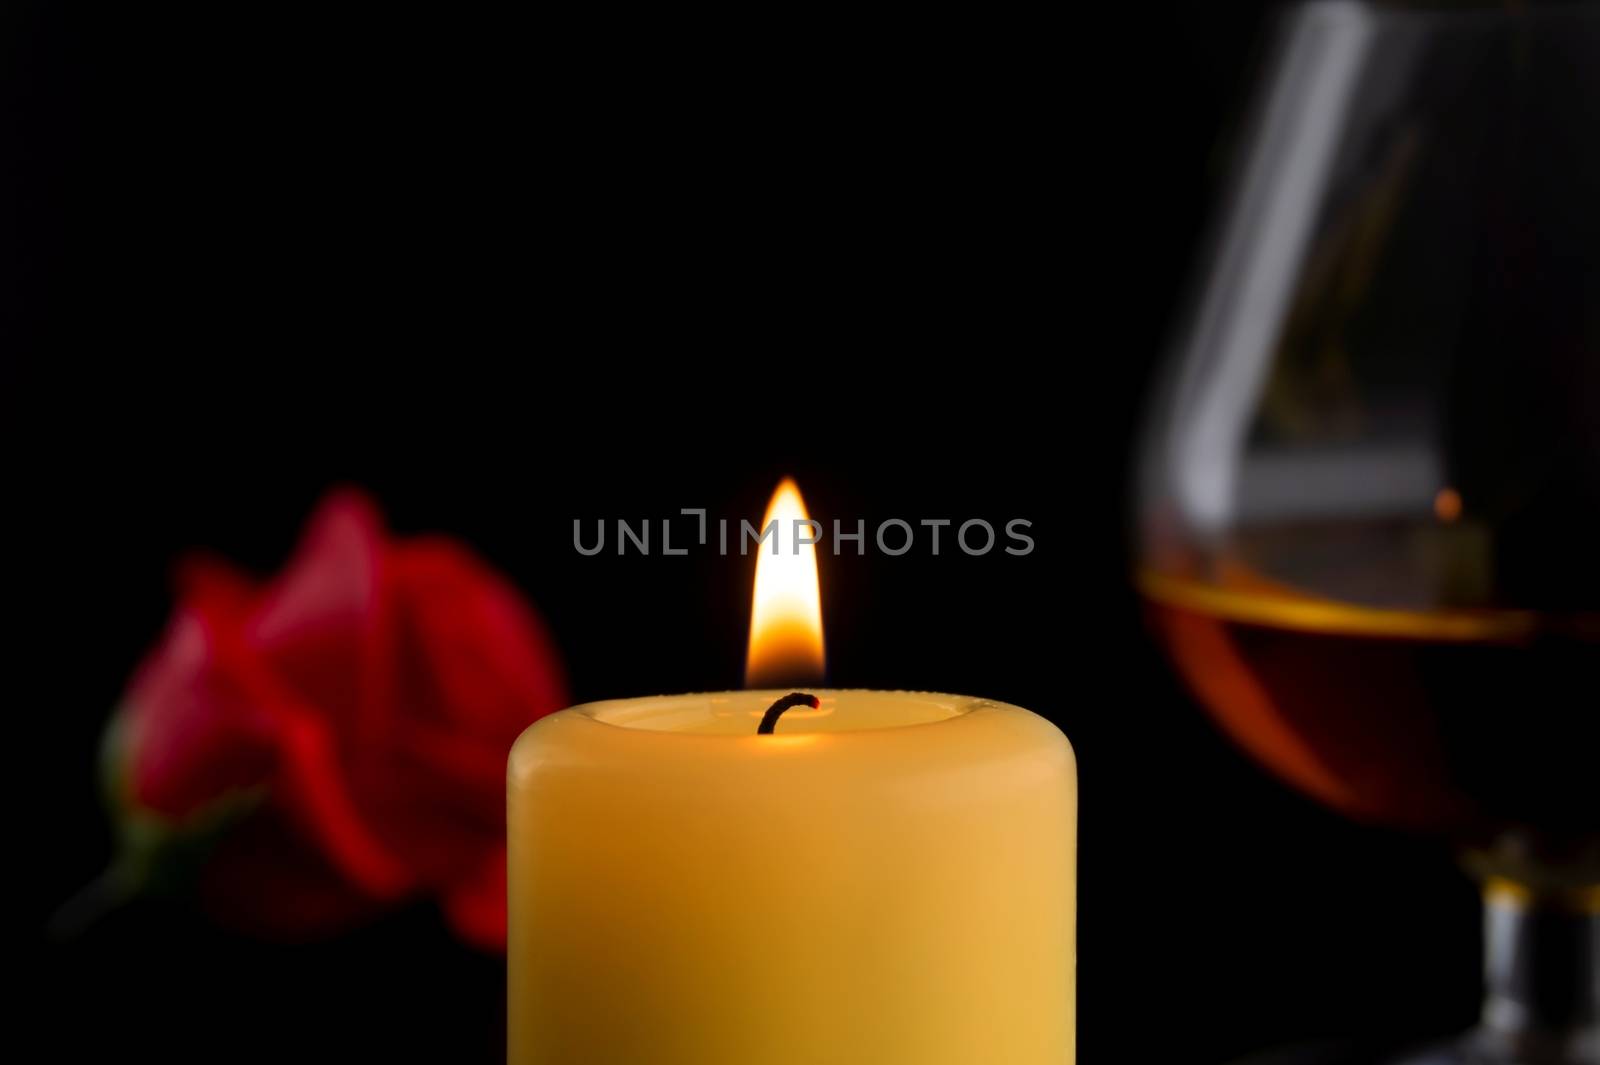 Single burning yellow candle in front of a glass of Cognac or Brandy and red roses against dark background